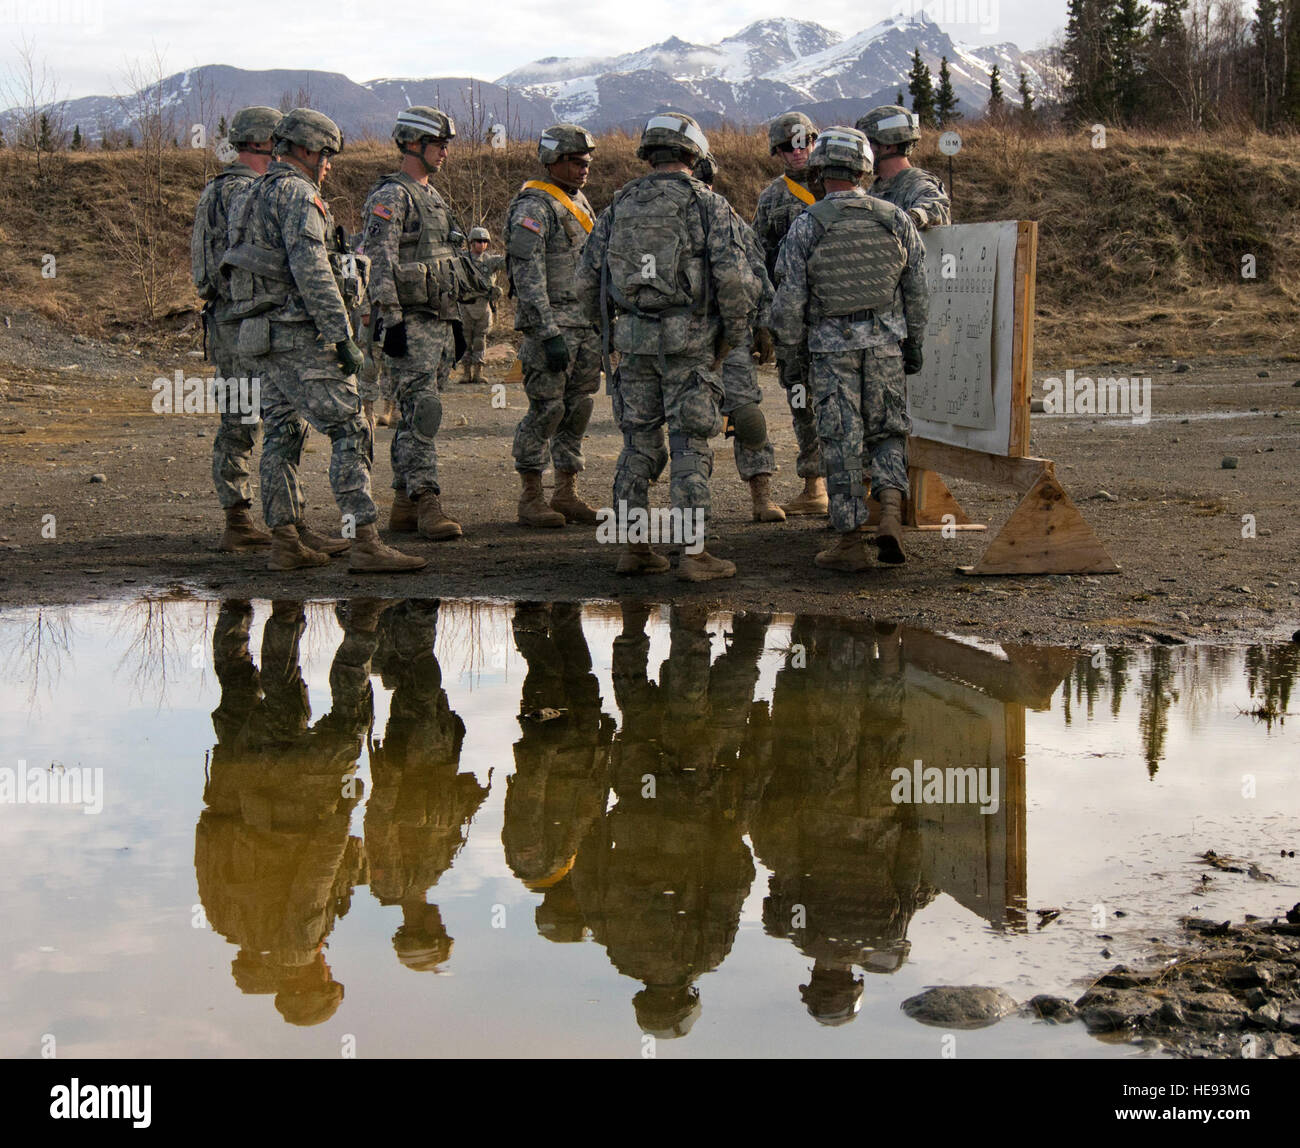 Soldiers of the 23rd Engineer Company, 6th Engineer Battalion (Combat) (Airborne), 2nd Engineer Brigade, U.S. Army Alaska, are seen reflected in a puddle of rain water as they receive instruction while training with the M249 Squad Automatic Weapon, Wednesday, April 23, 2014, on Joint Base Elmendorf-Richardson, Alaska. The M249 is an American adaptation of the Belgian Fabrique Nationale Herstal Minimi, a light machine gun manufactured by the FN Herstal company, and has seen action in every major conflict involving the United States since the U.S. invasion of Panama in 1989. Justin Connaher) Stock Photo